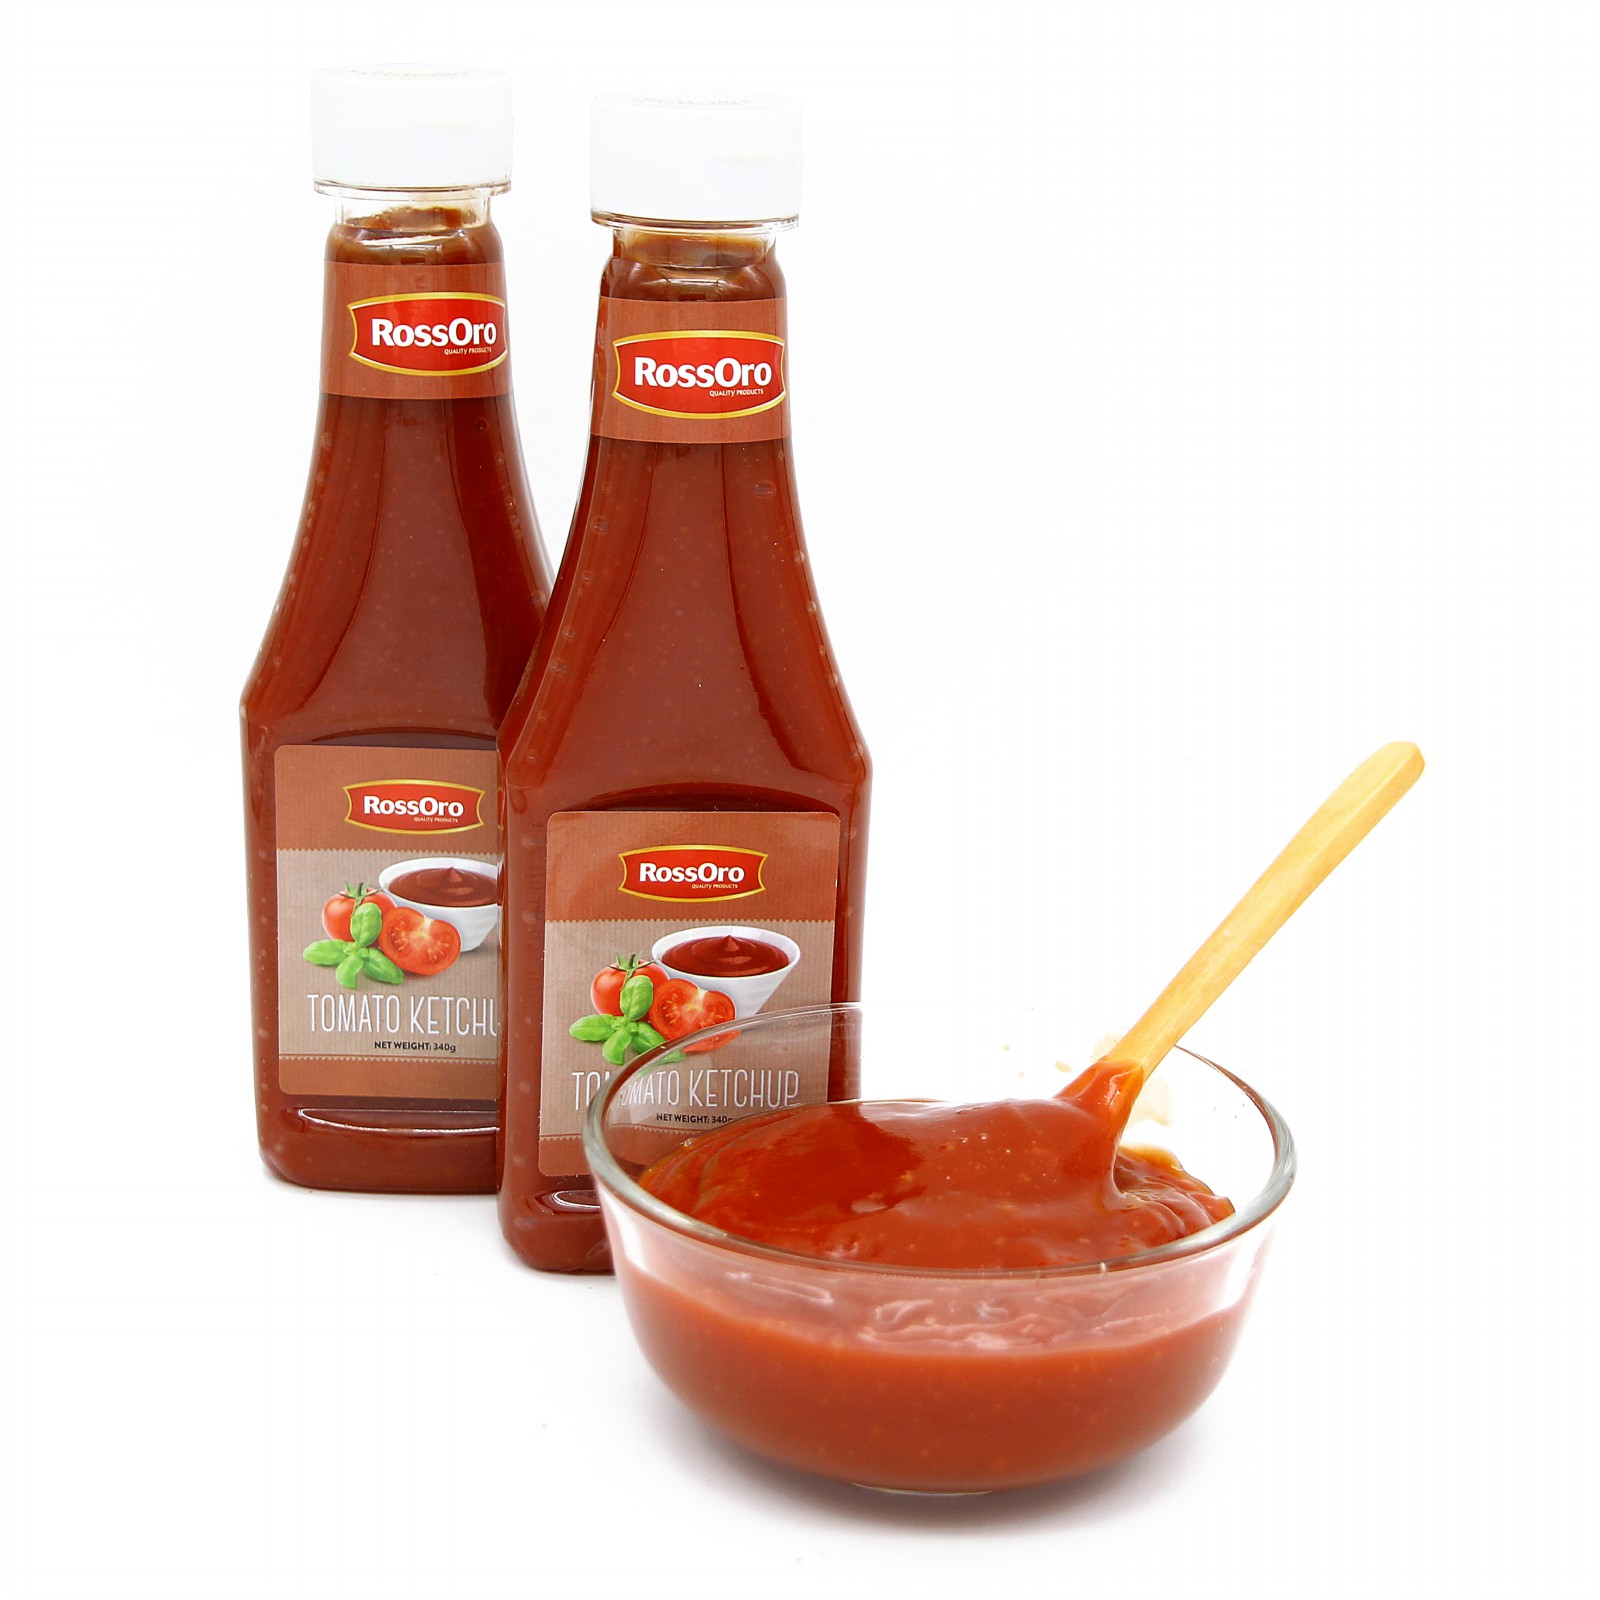 Tomato ketchup in bottle